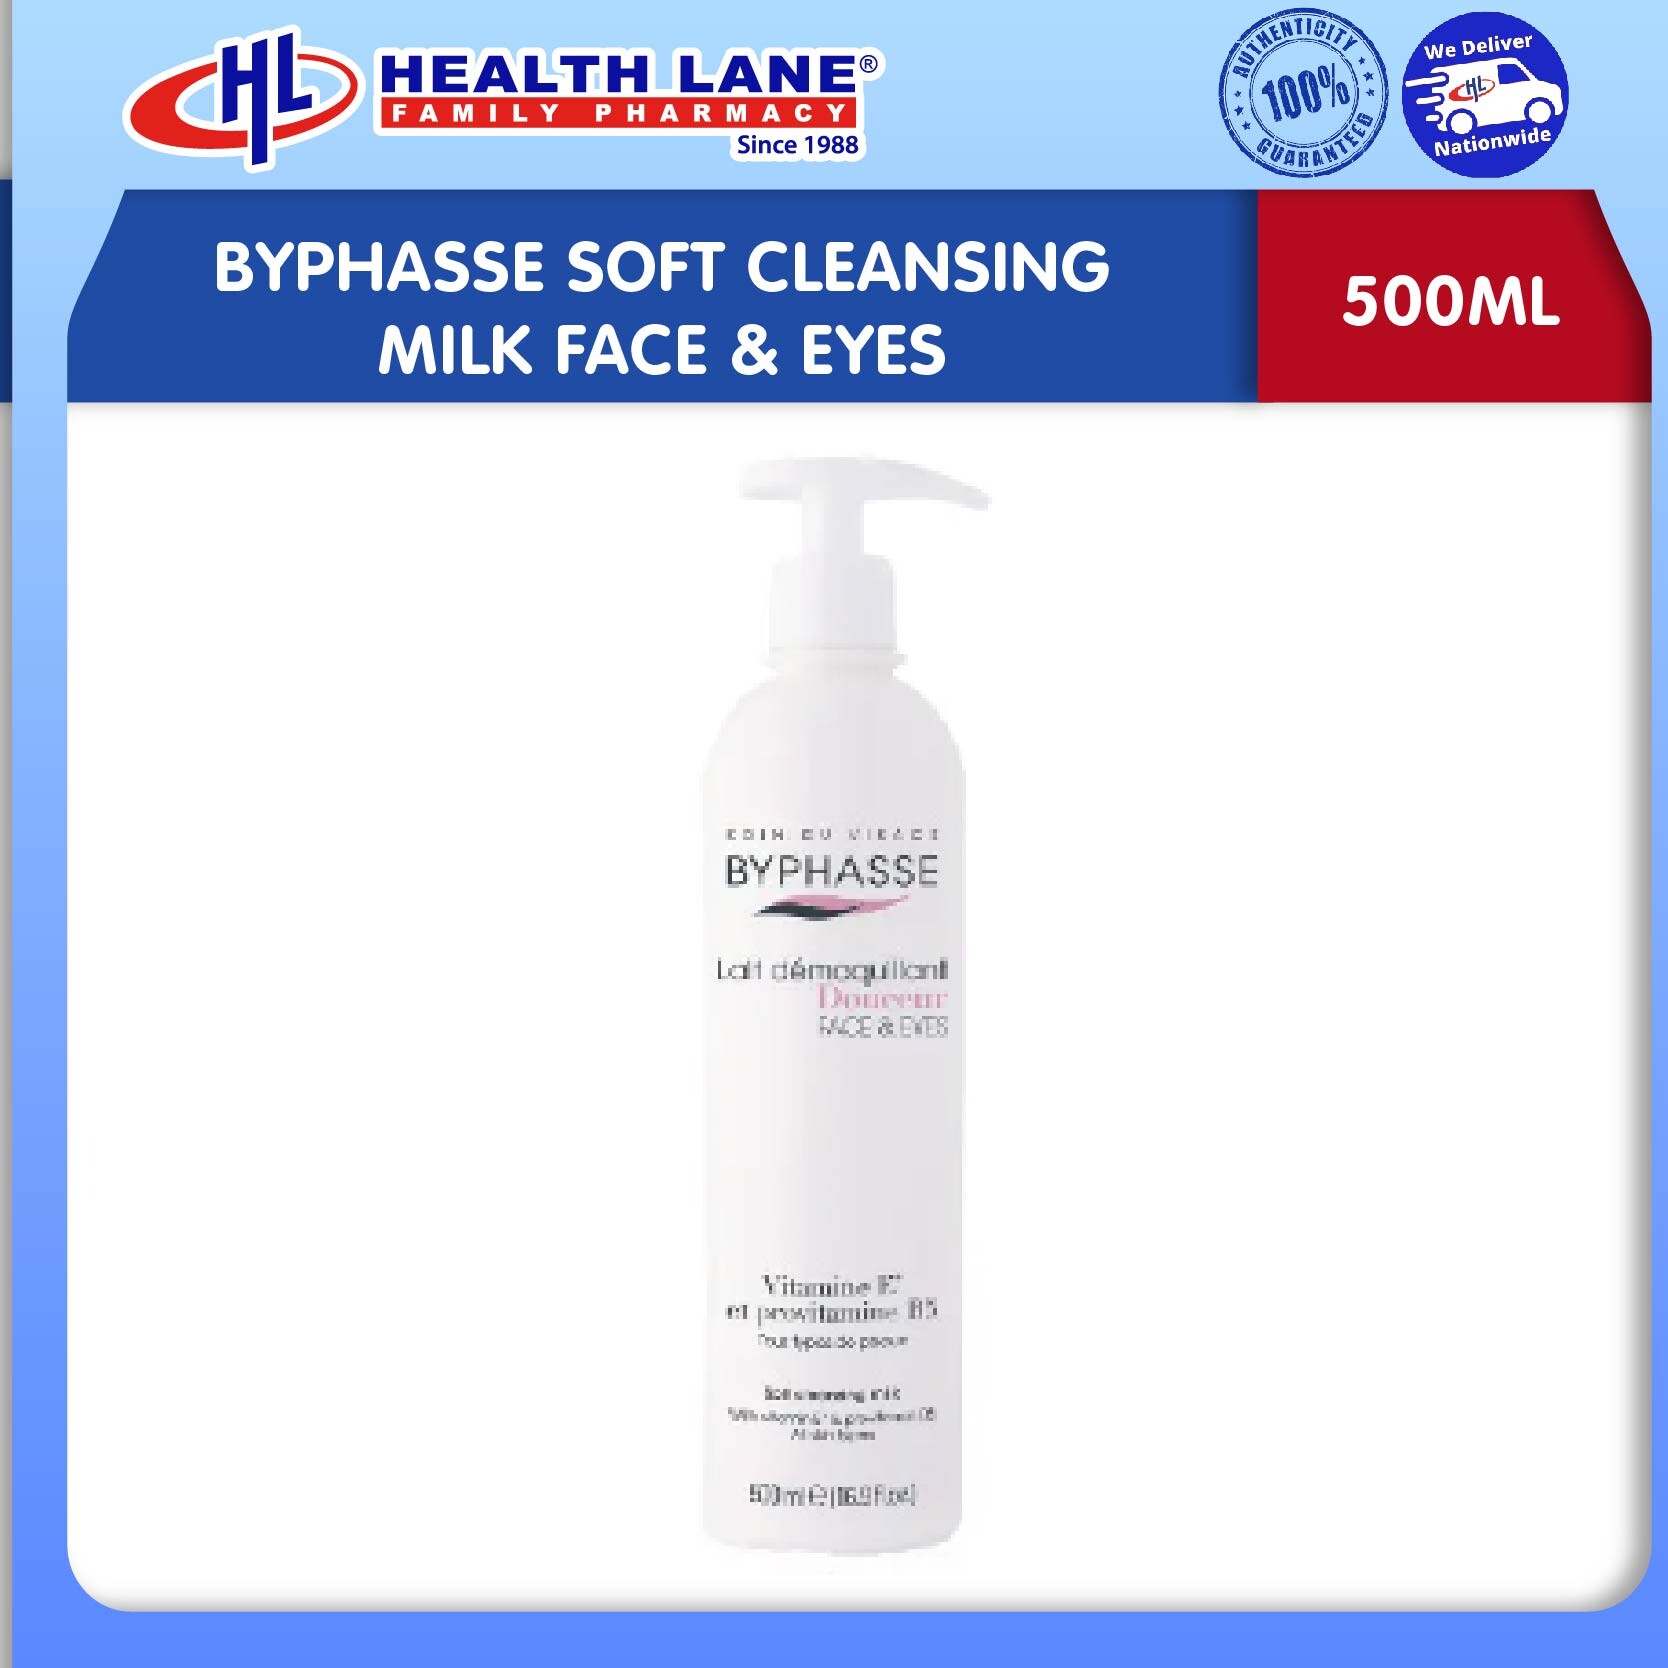 BYPHASSE SOFT CLEANSING MILK FACE & EYES (500ML)